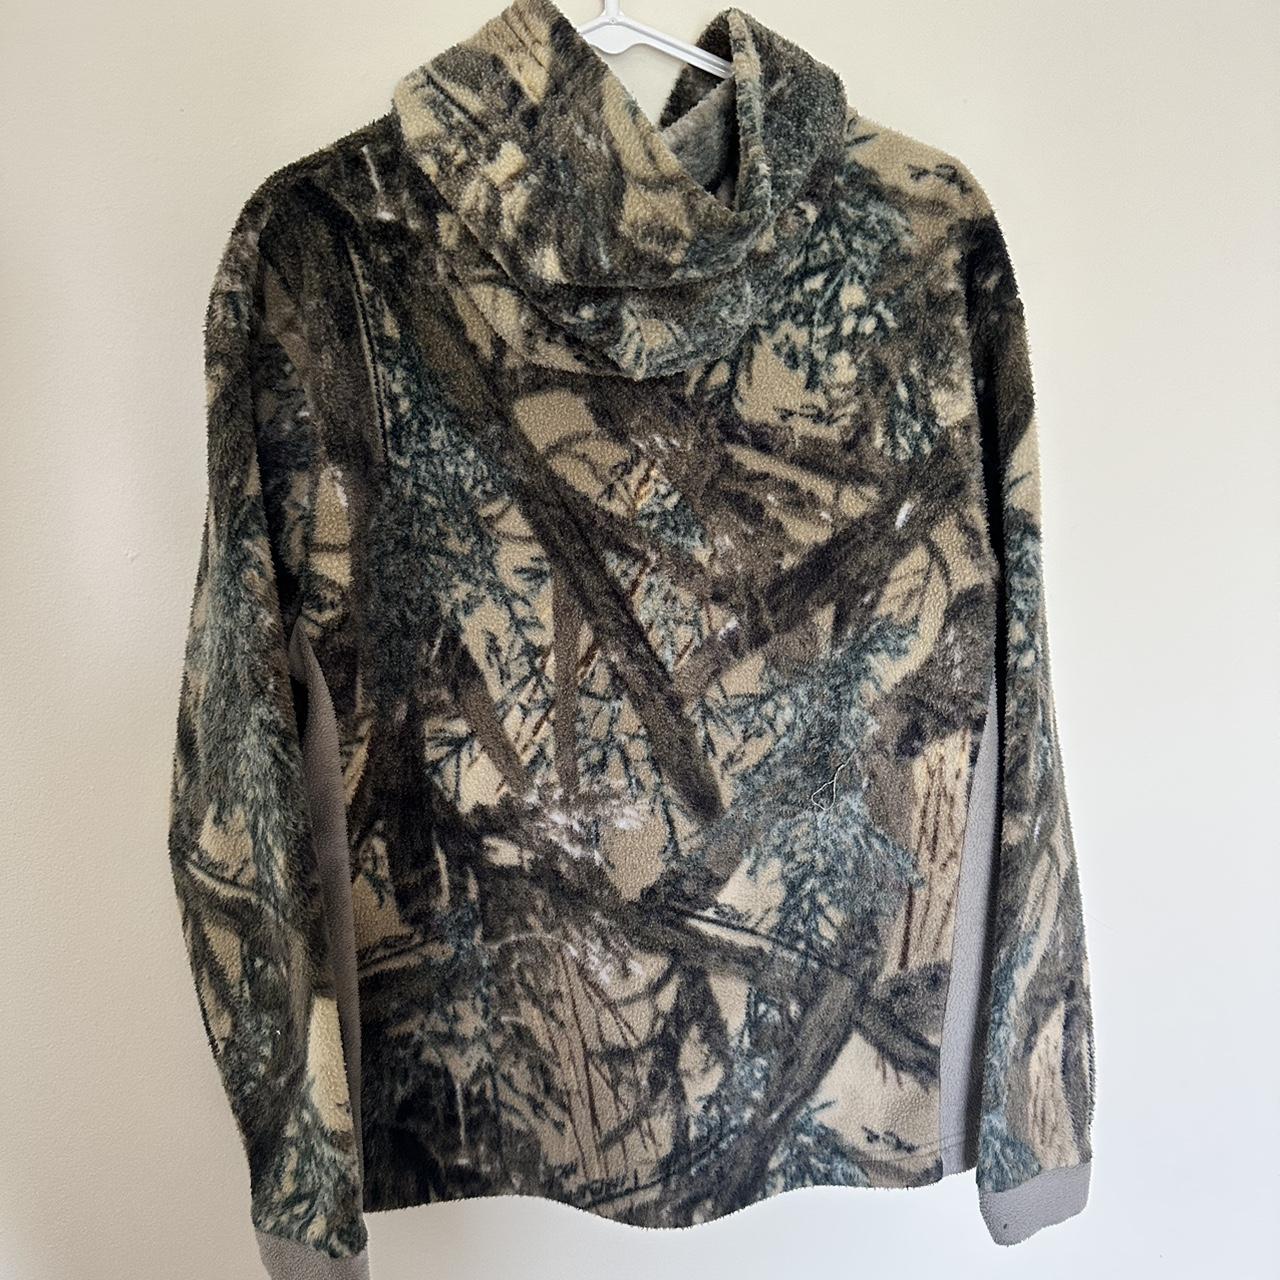 Camo hoodie in perfect condition #camo #hoodie... - Depop